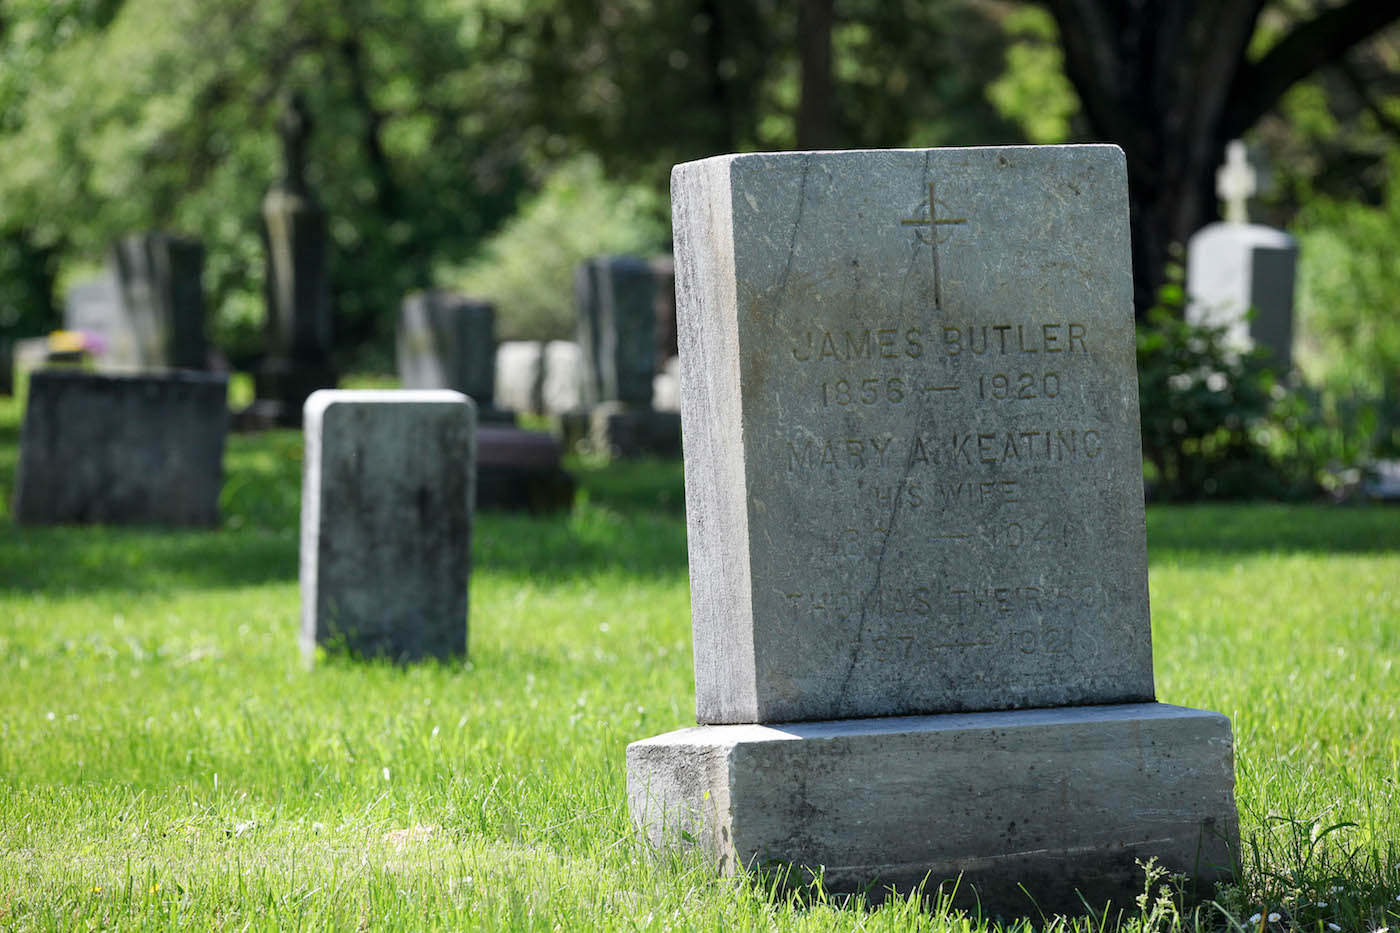 An old, worn rectangular headstone with Thomas F. Butler's name on it. Above are the names of his parents, who he was buried near.